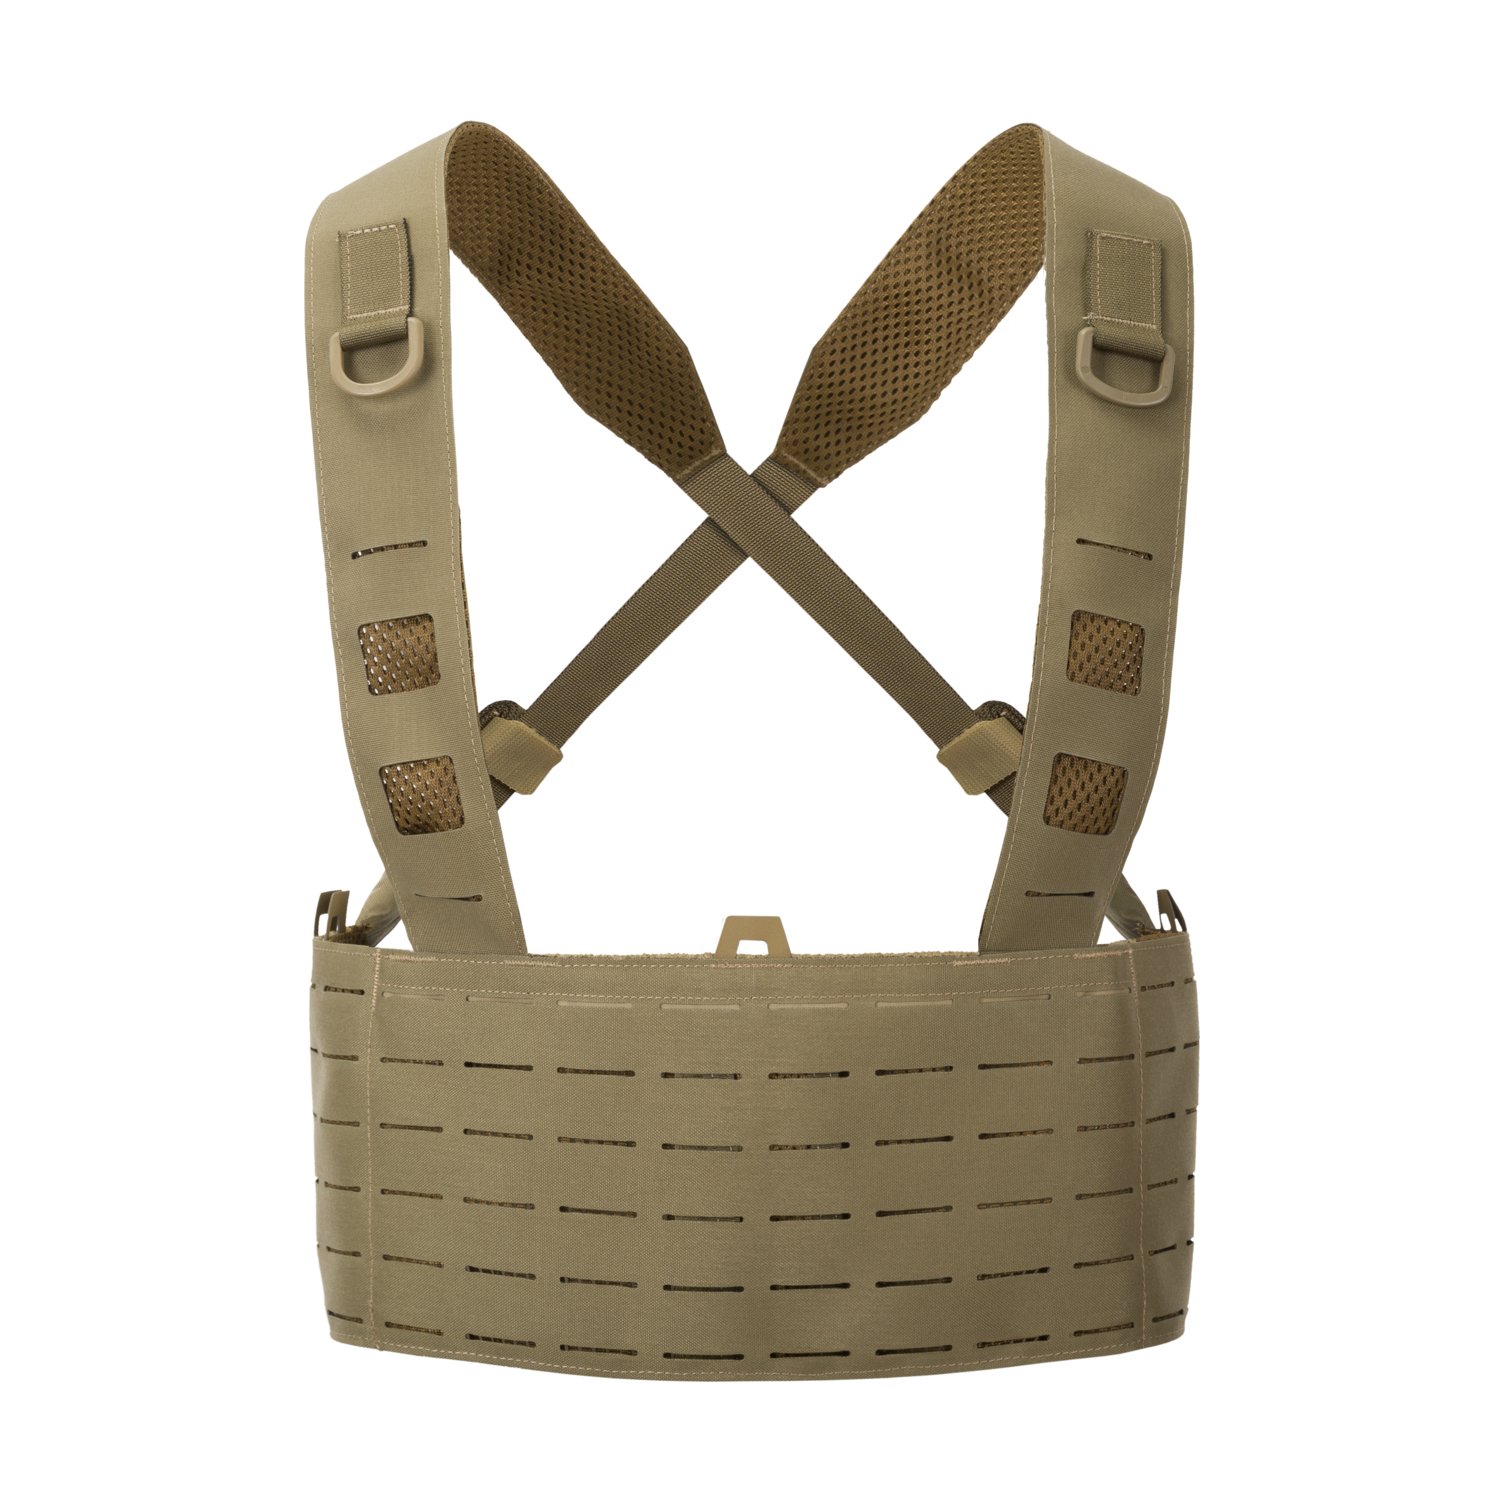 Typhoon Chest Rig | On Duty Equipment Contract Division